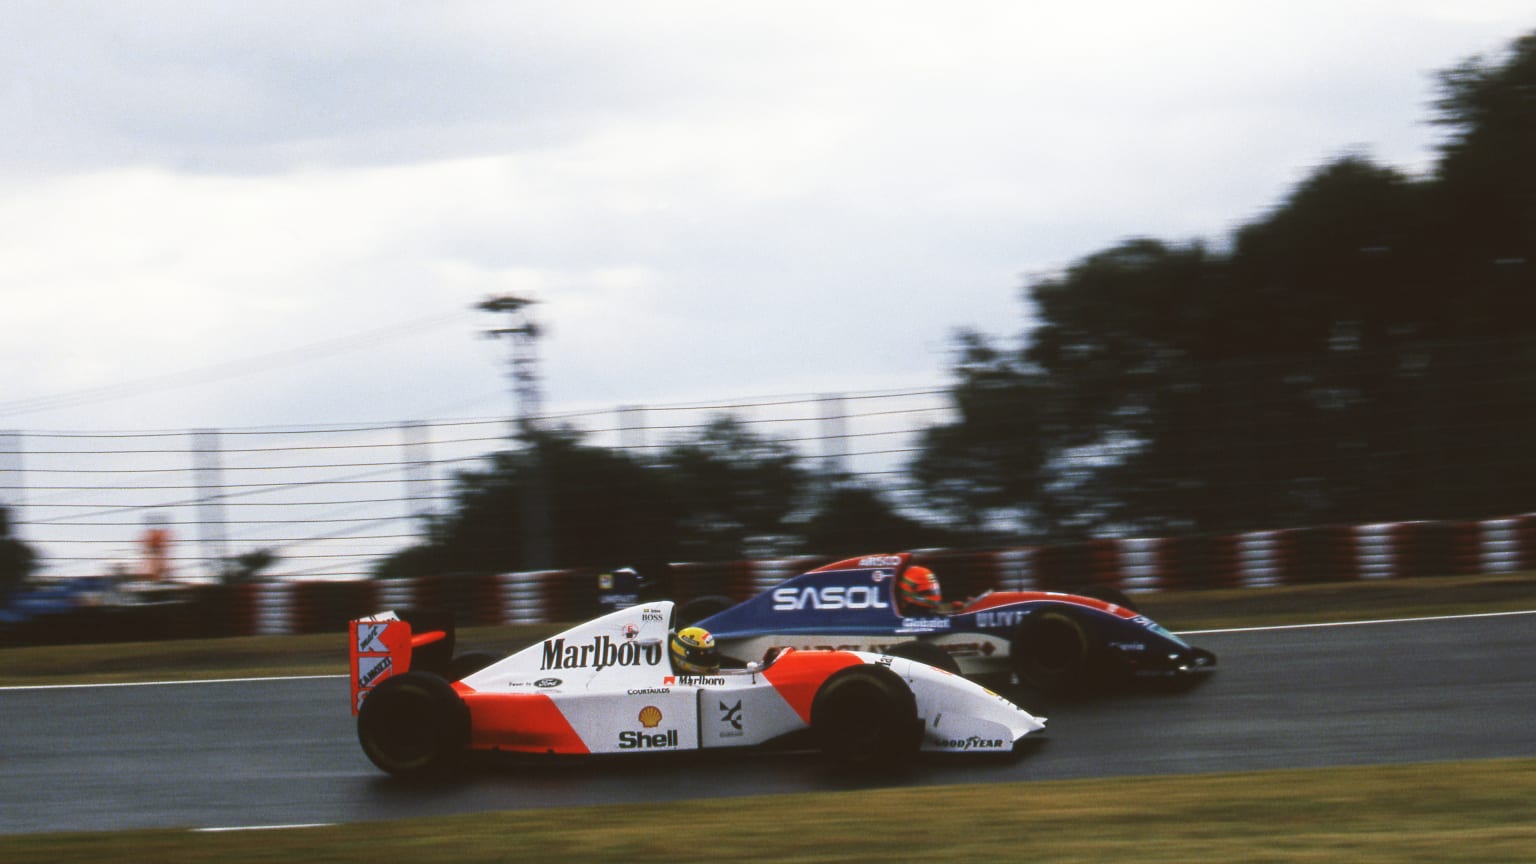 Do you remember… when Senna and Irvine came to blows at Suzuka